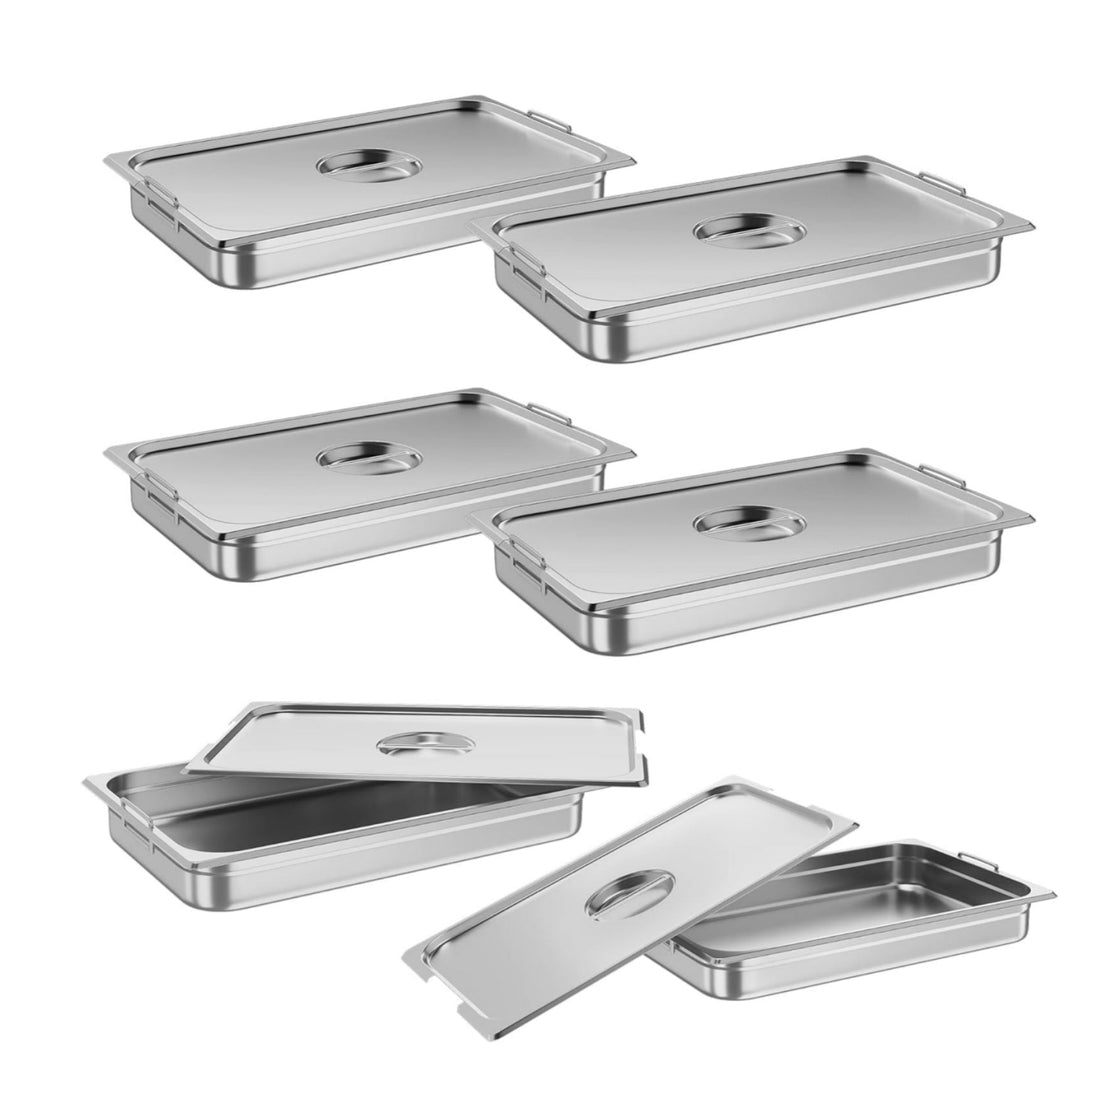 6 Pack 2.5 Inch Deep Stainless Steel Hotel Pan with Lid, NSF